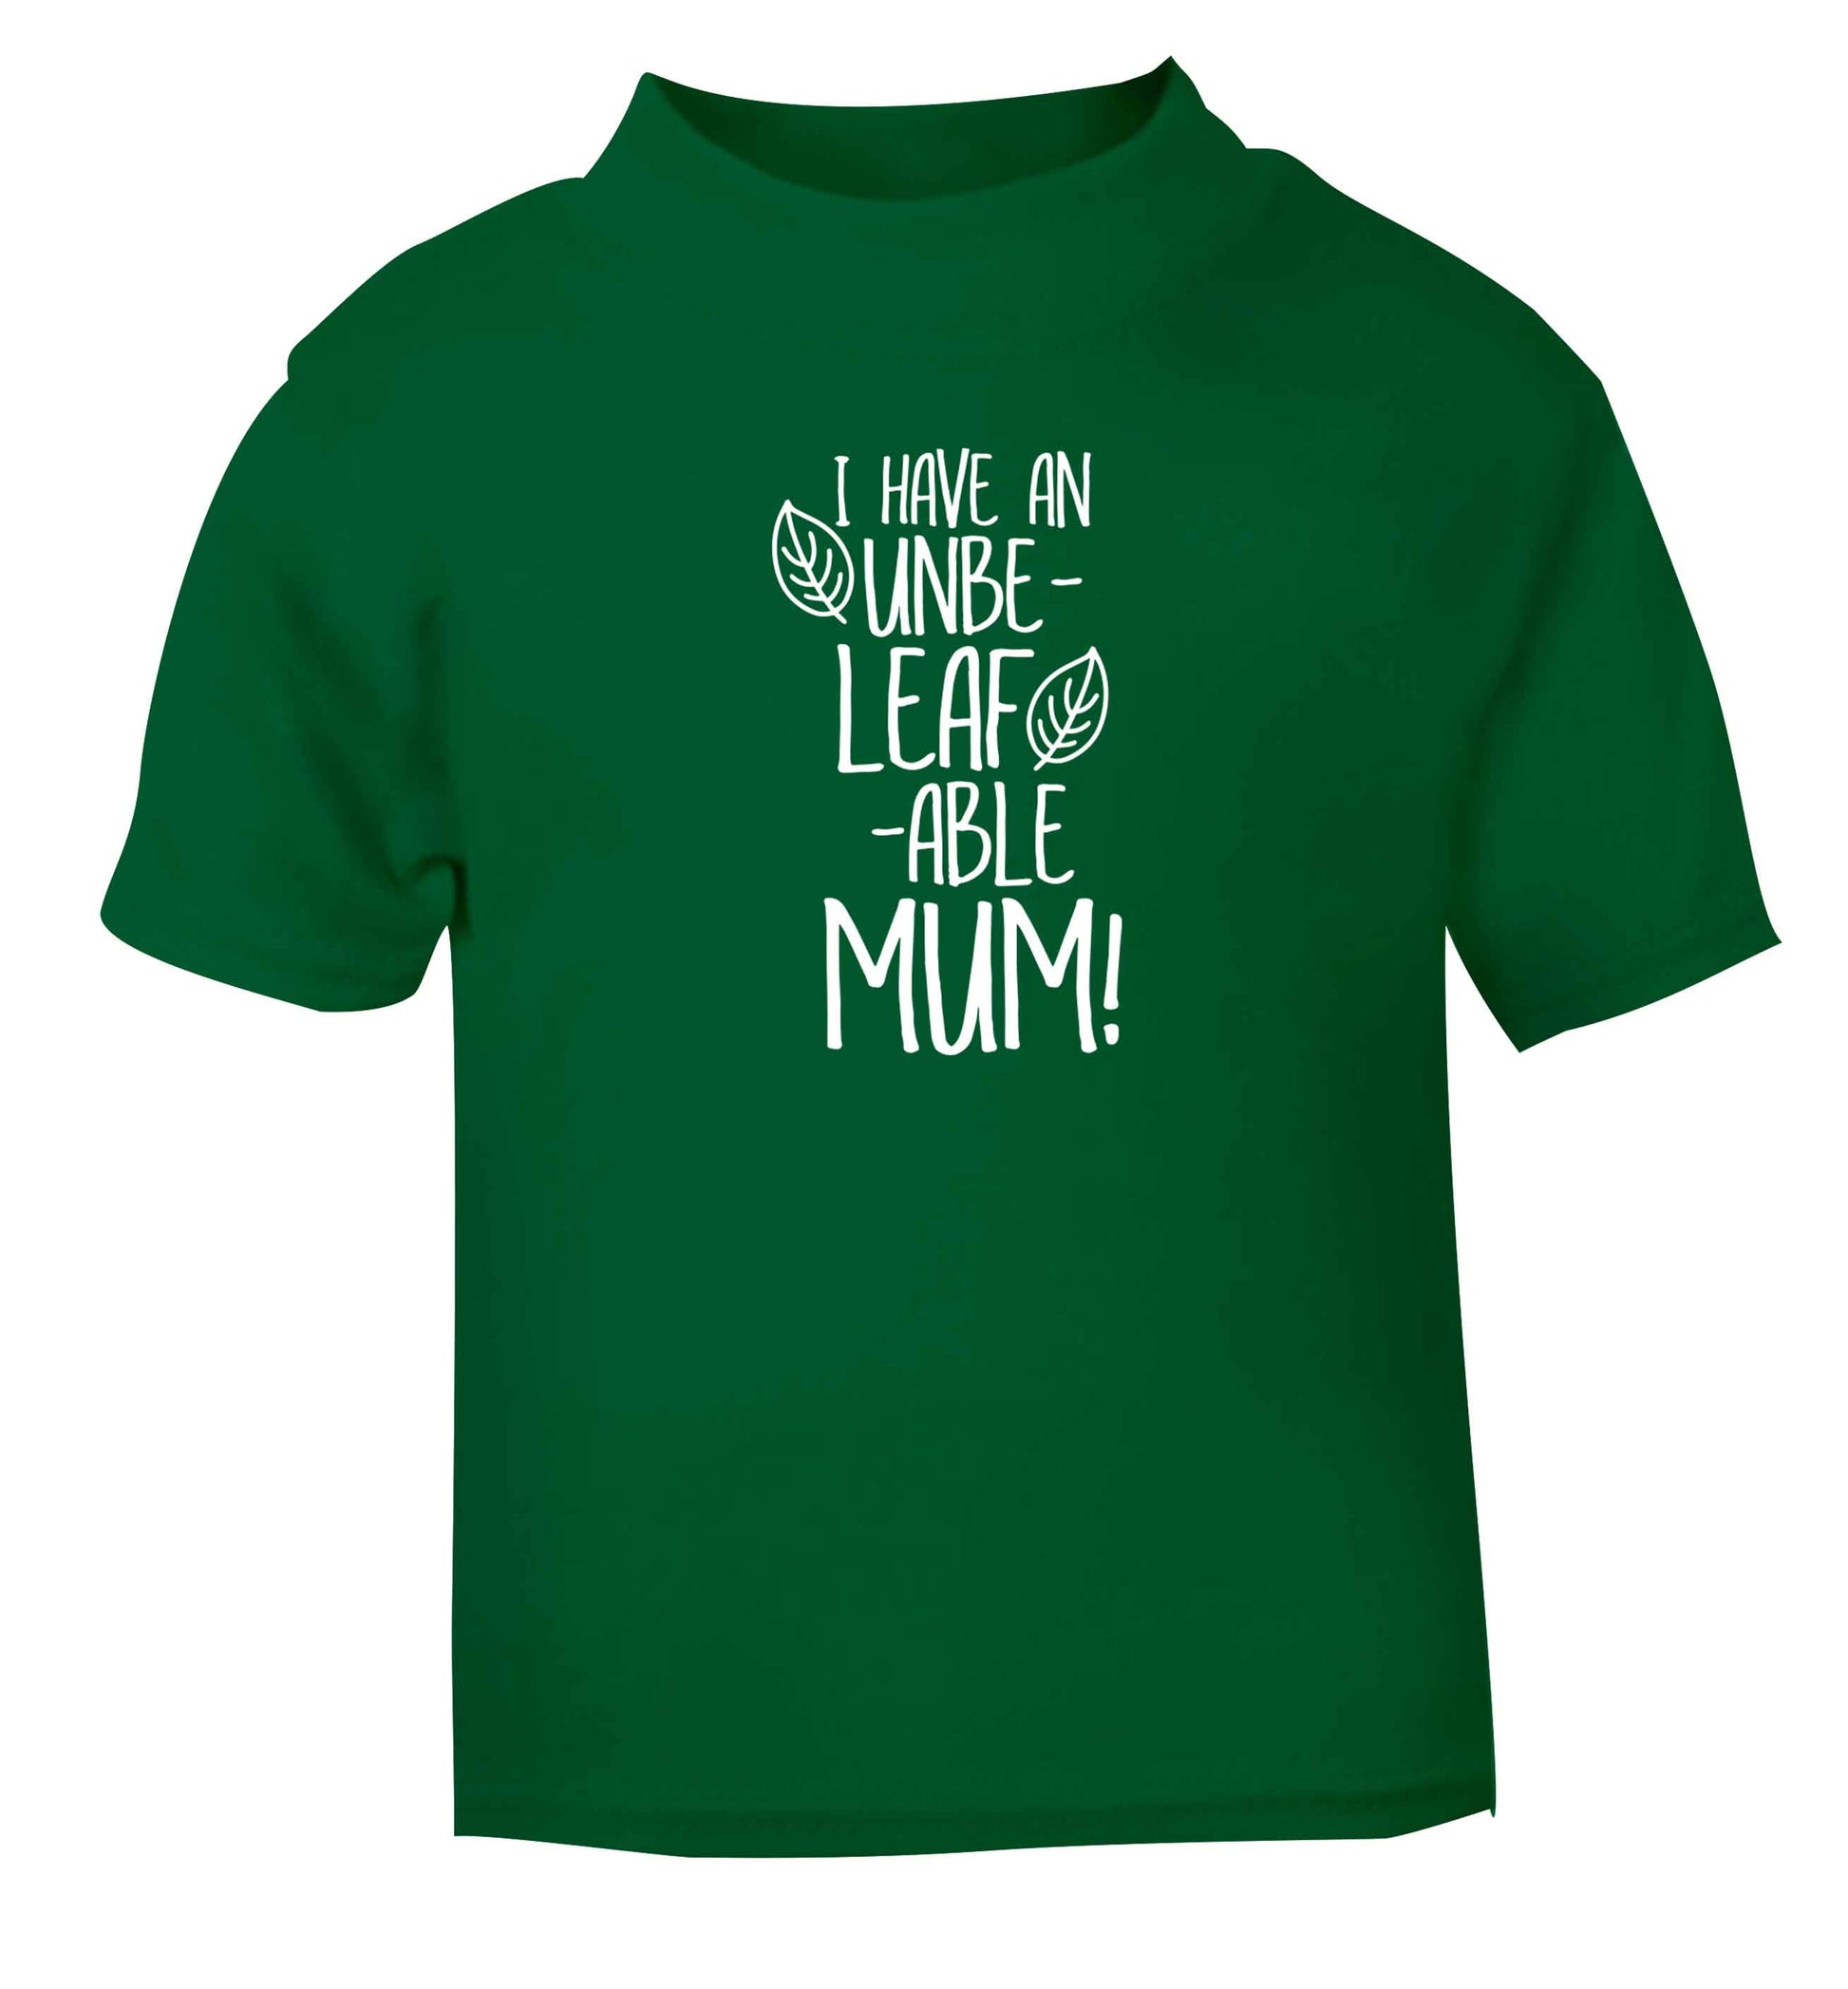 I have an unbeleafable mum! green baby toddler Tshirt 2 Years